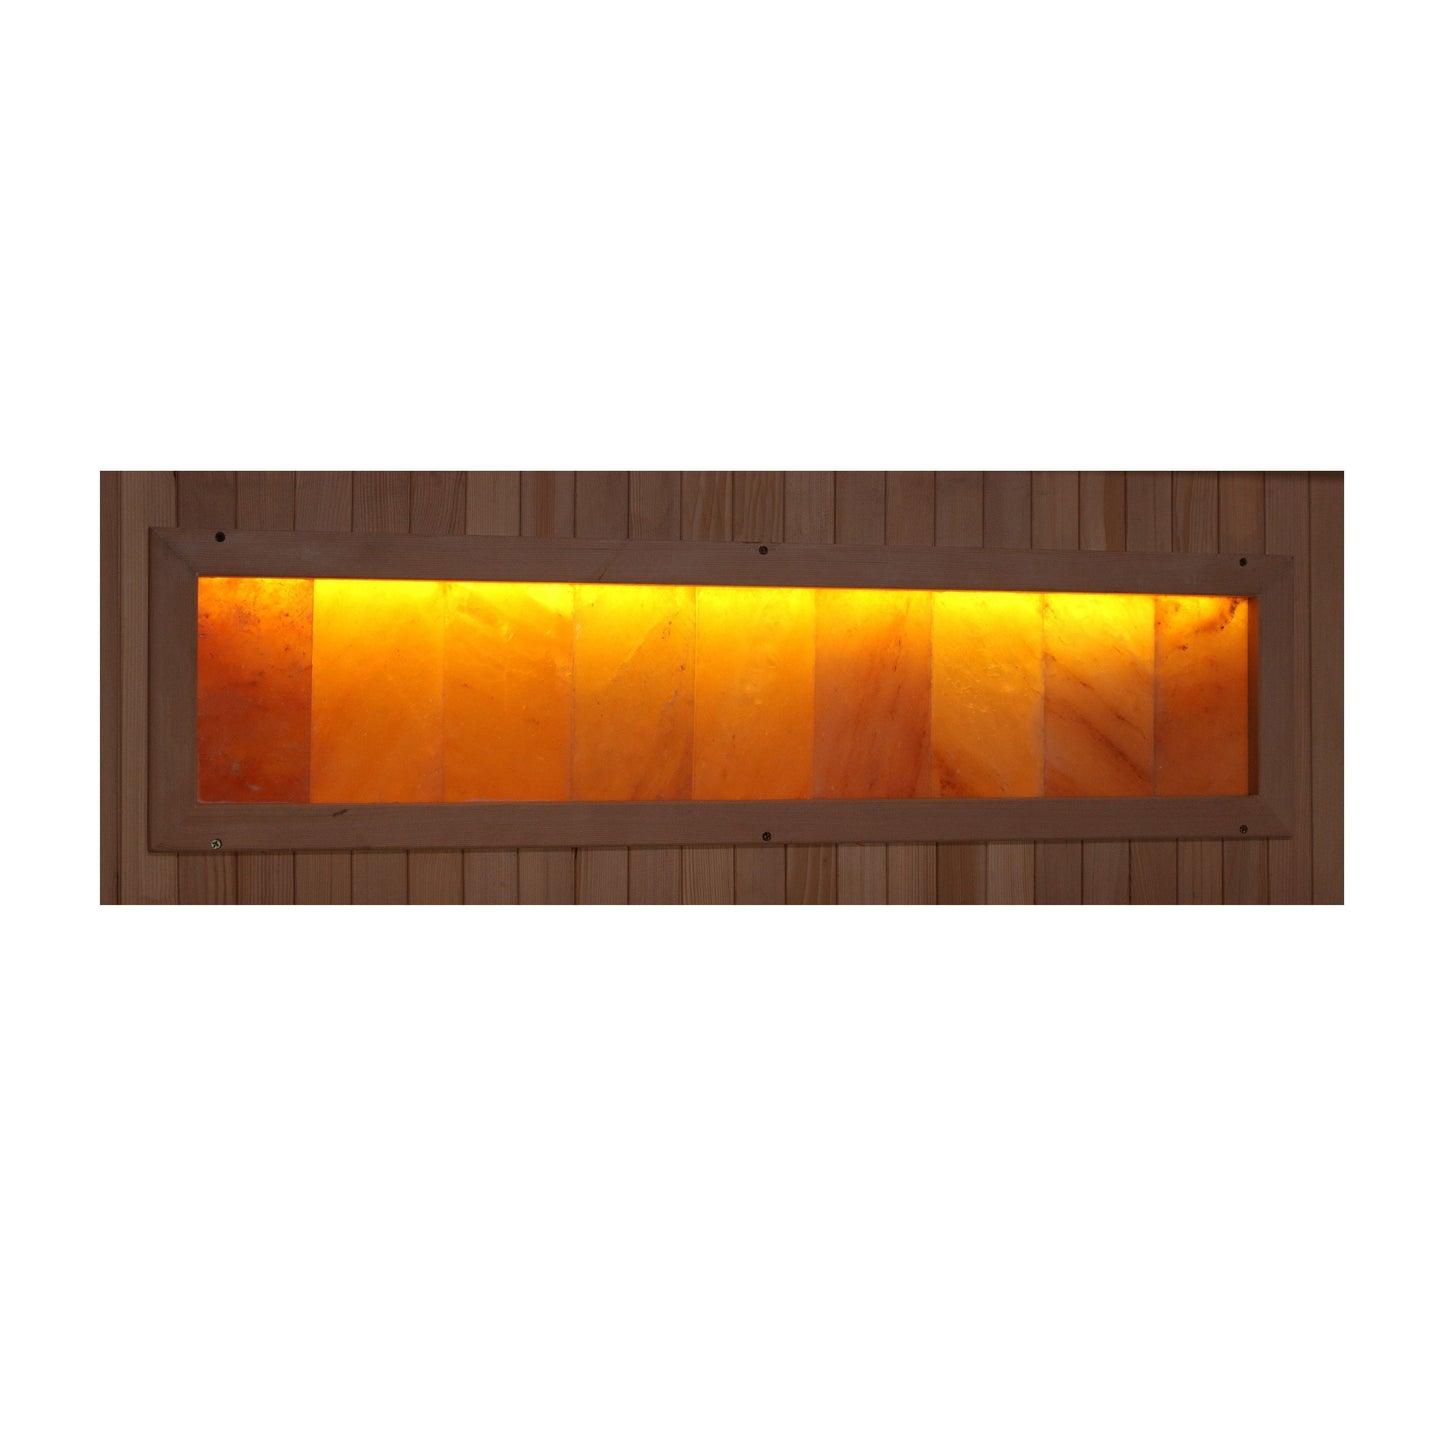 Golden Designs Reserve Edition 1 Person Full Spectrum with Himalayan Salt Bar